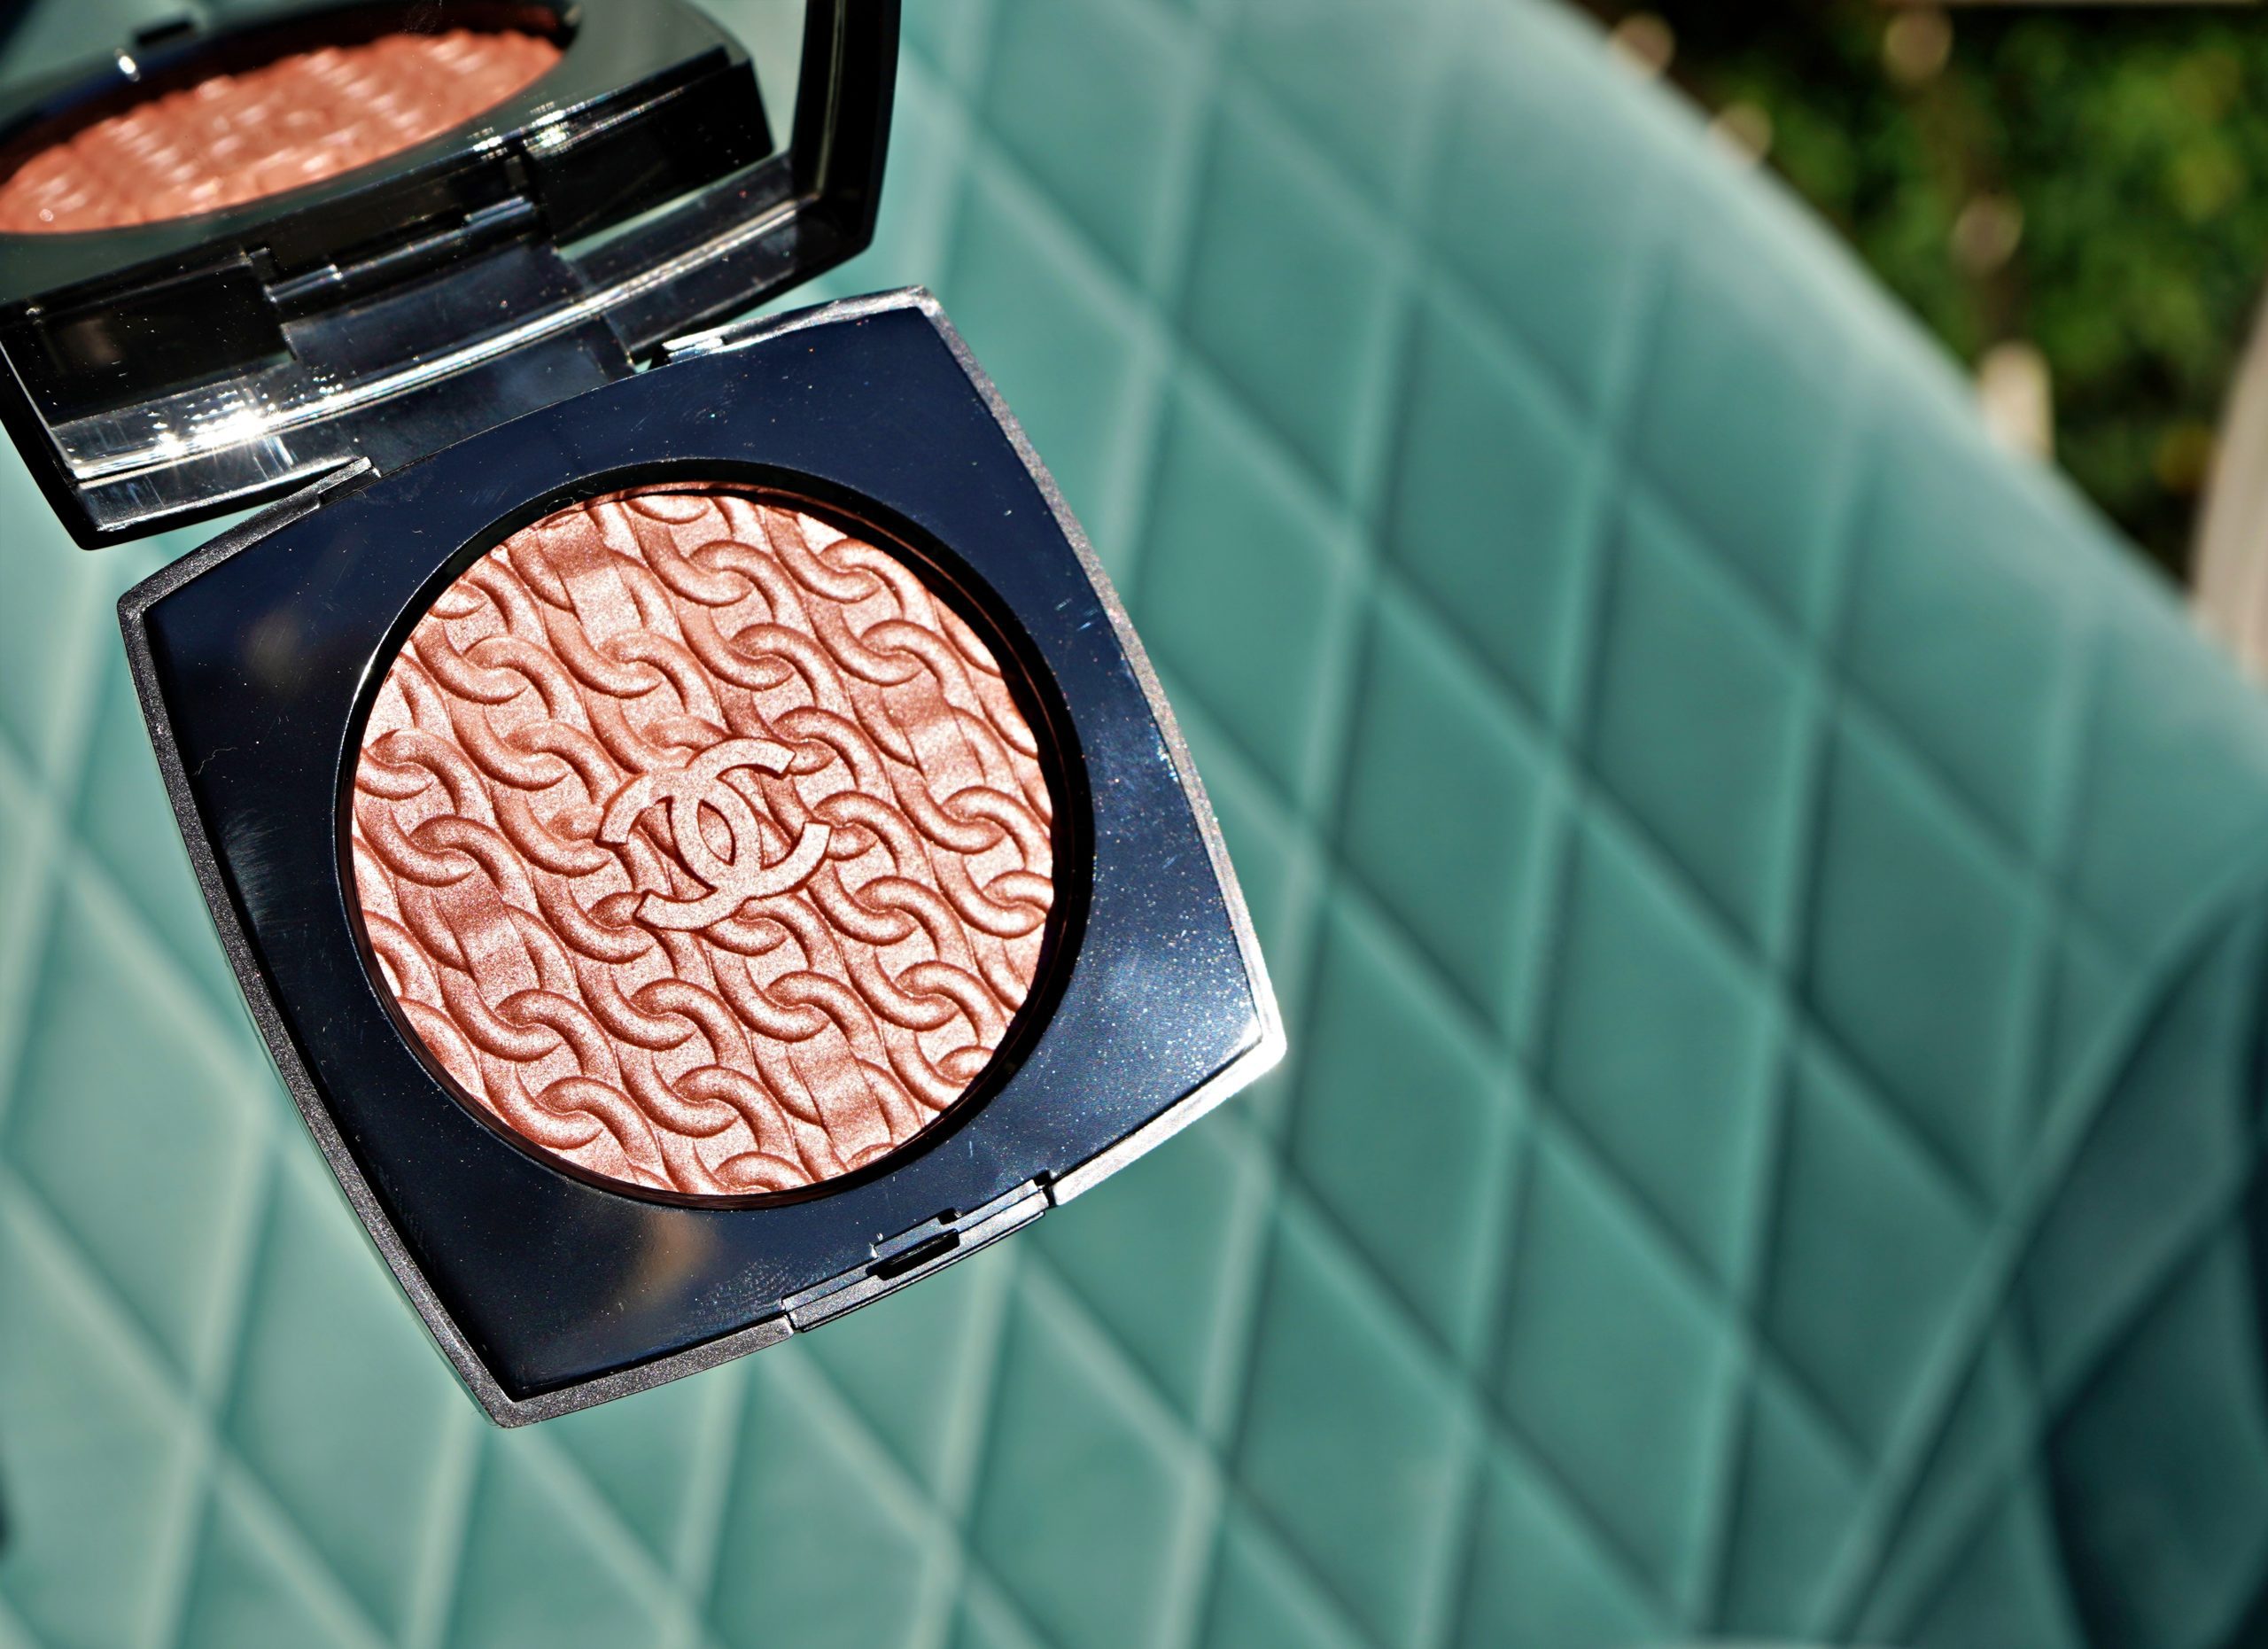 Chanel Les Chaines de Chanel Illuminating Blush Powder | A Classic Chanel Beauty Look